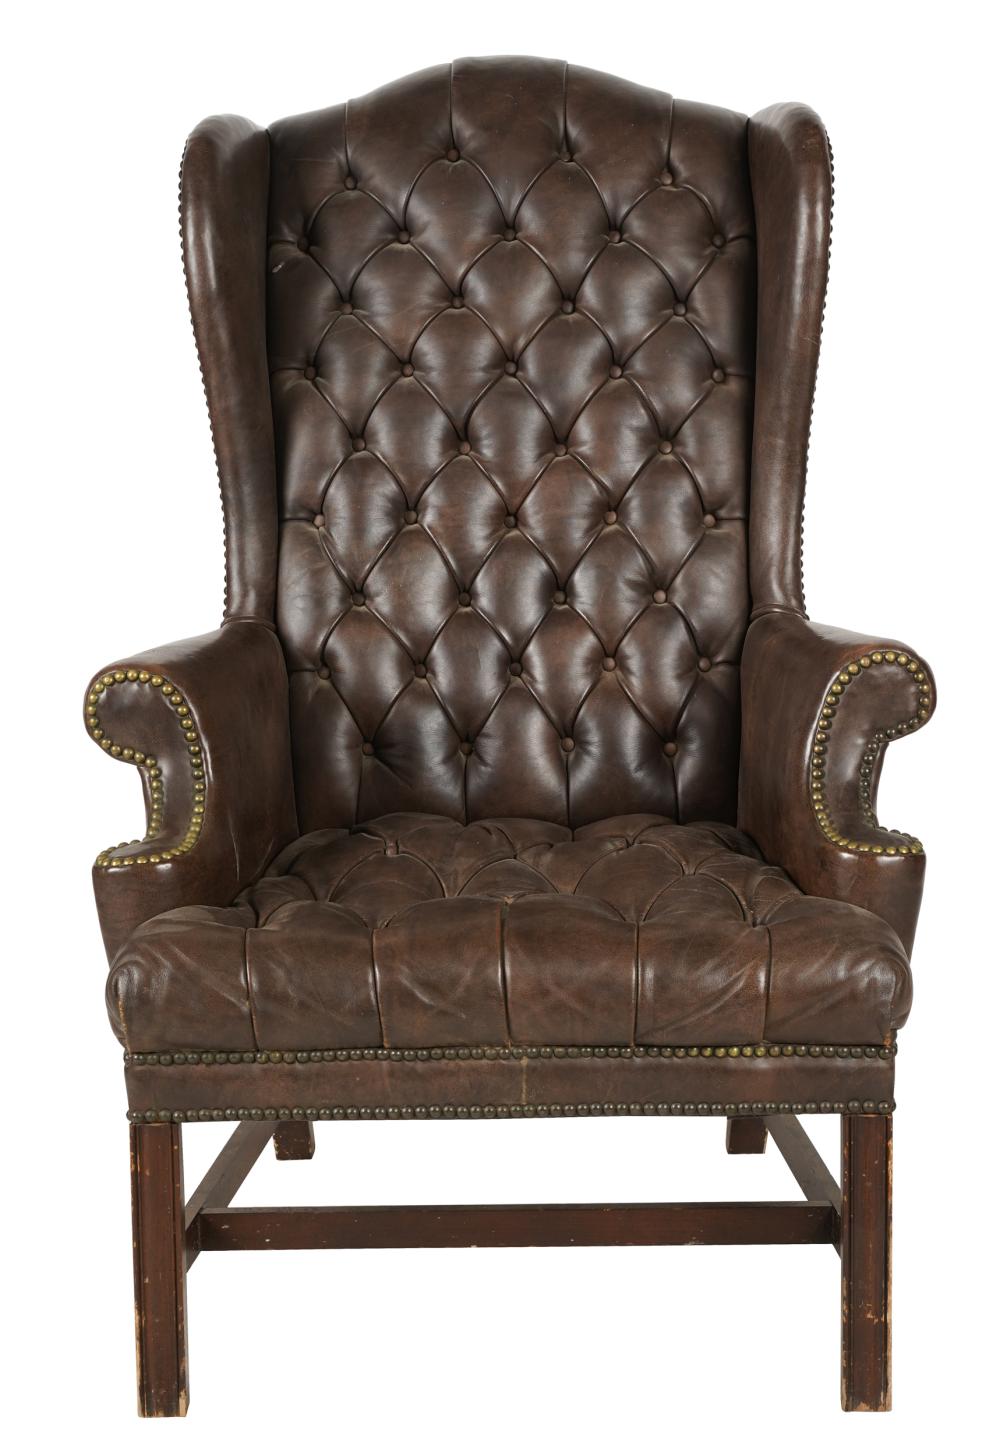 GEORGIAN-STYLE LEATHER WINGCHAIRCondition: